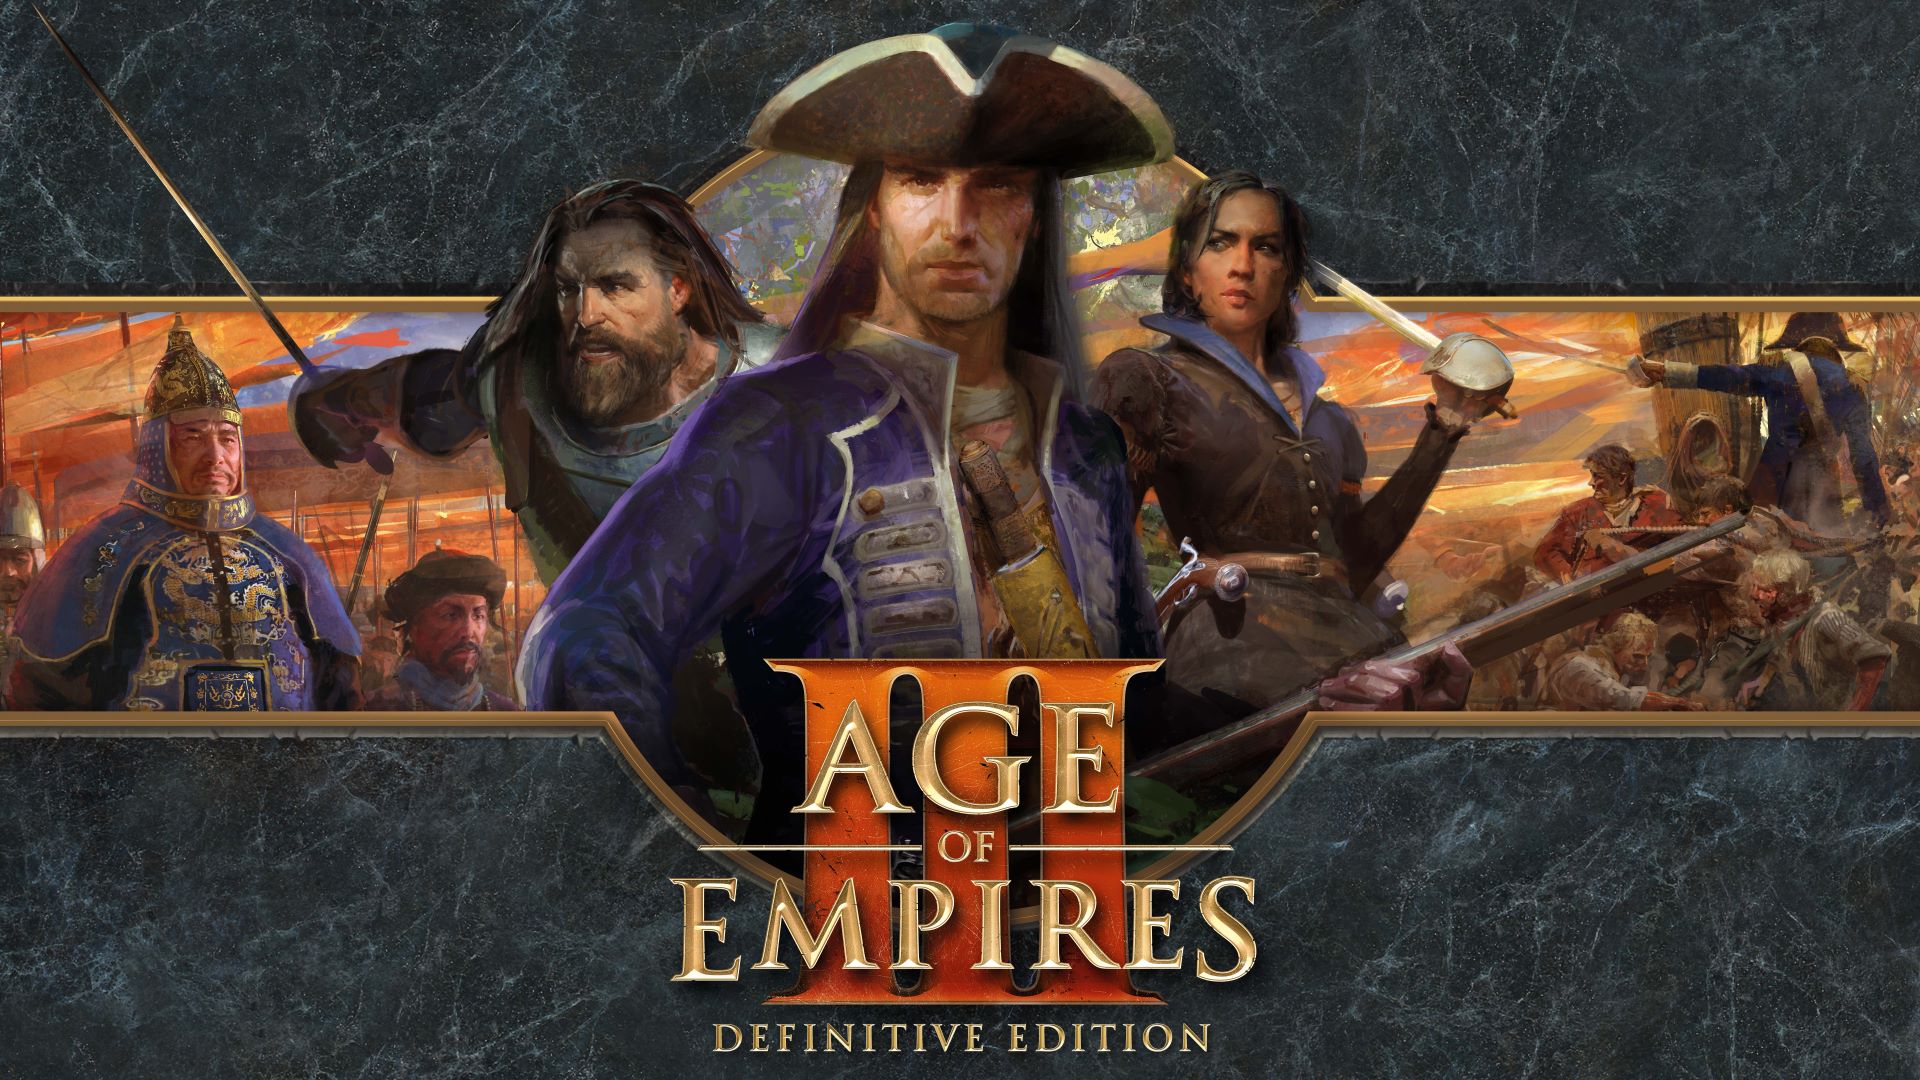 Video For Age of Empires III: Definitive Edition Out Now Worldwide!